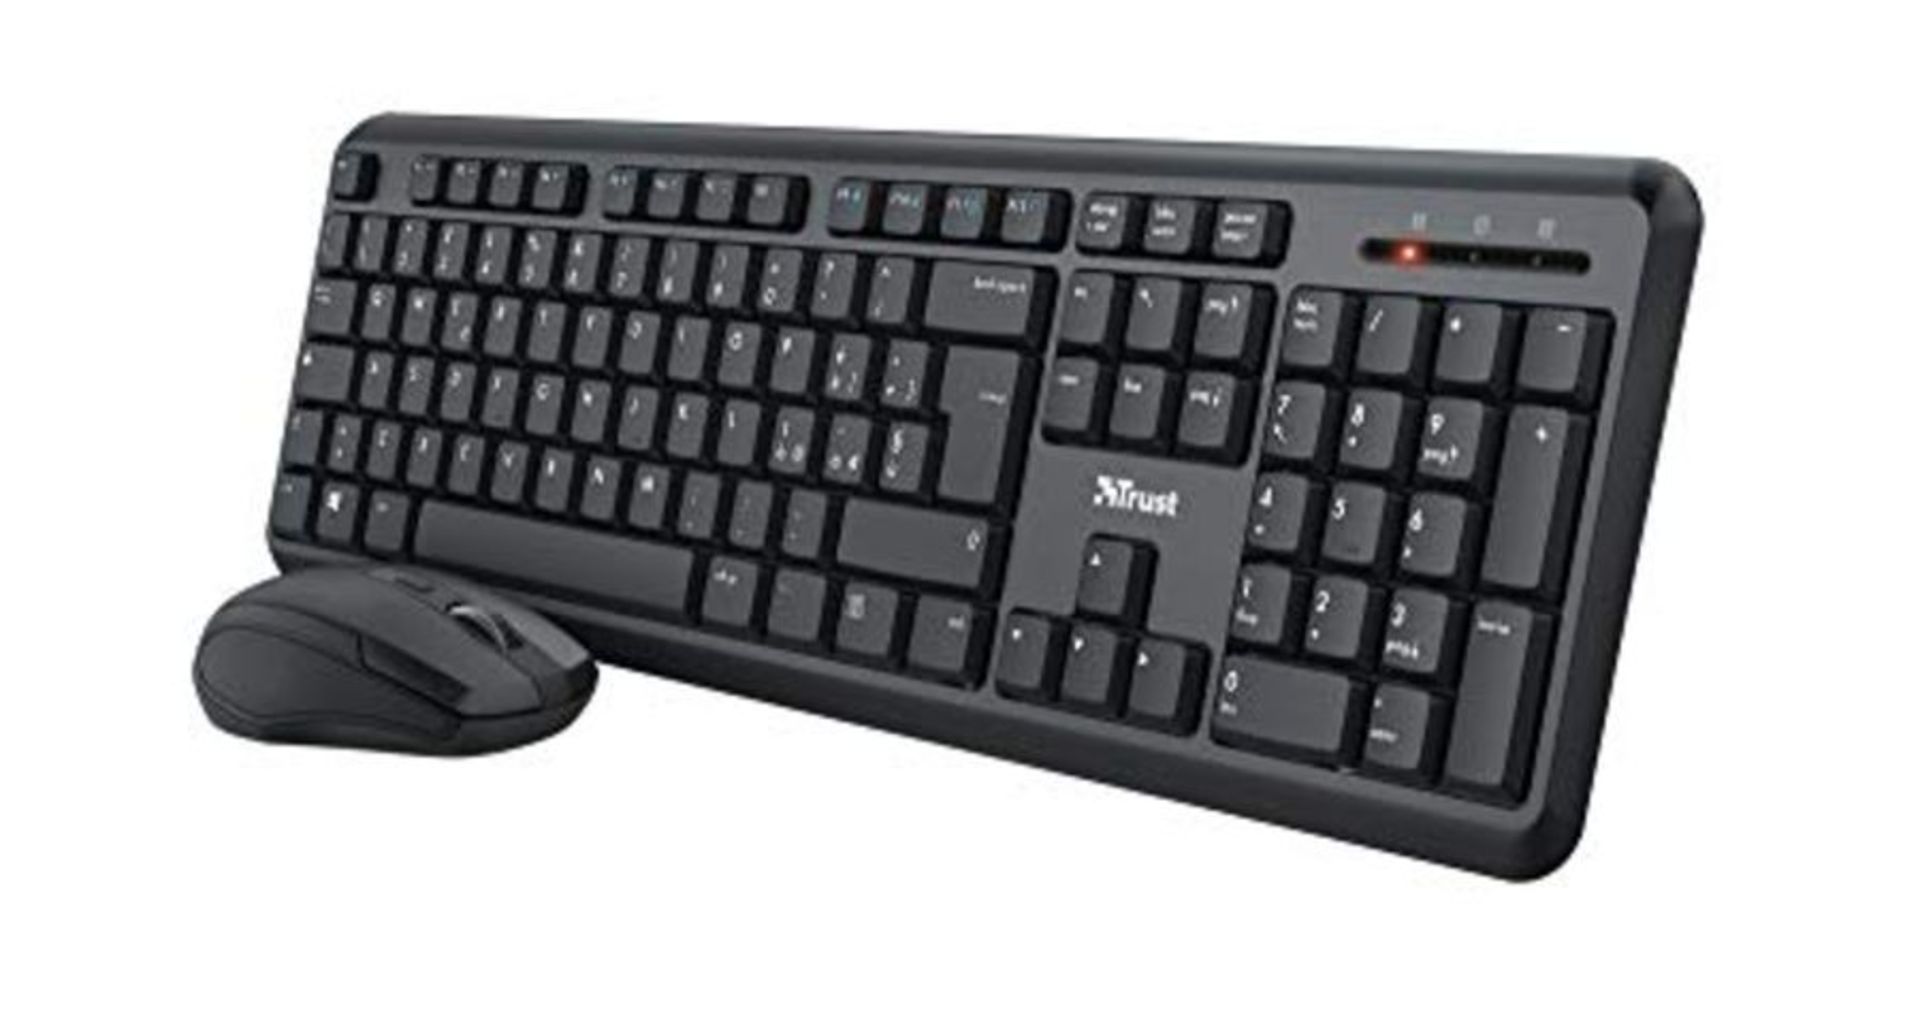 Trust Ymo Wireless Keyboard and Mouse Set Italian Layout for Windows/Linux (Silent, Wi